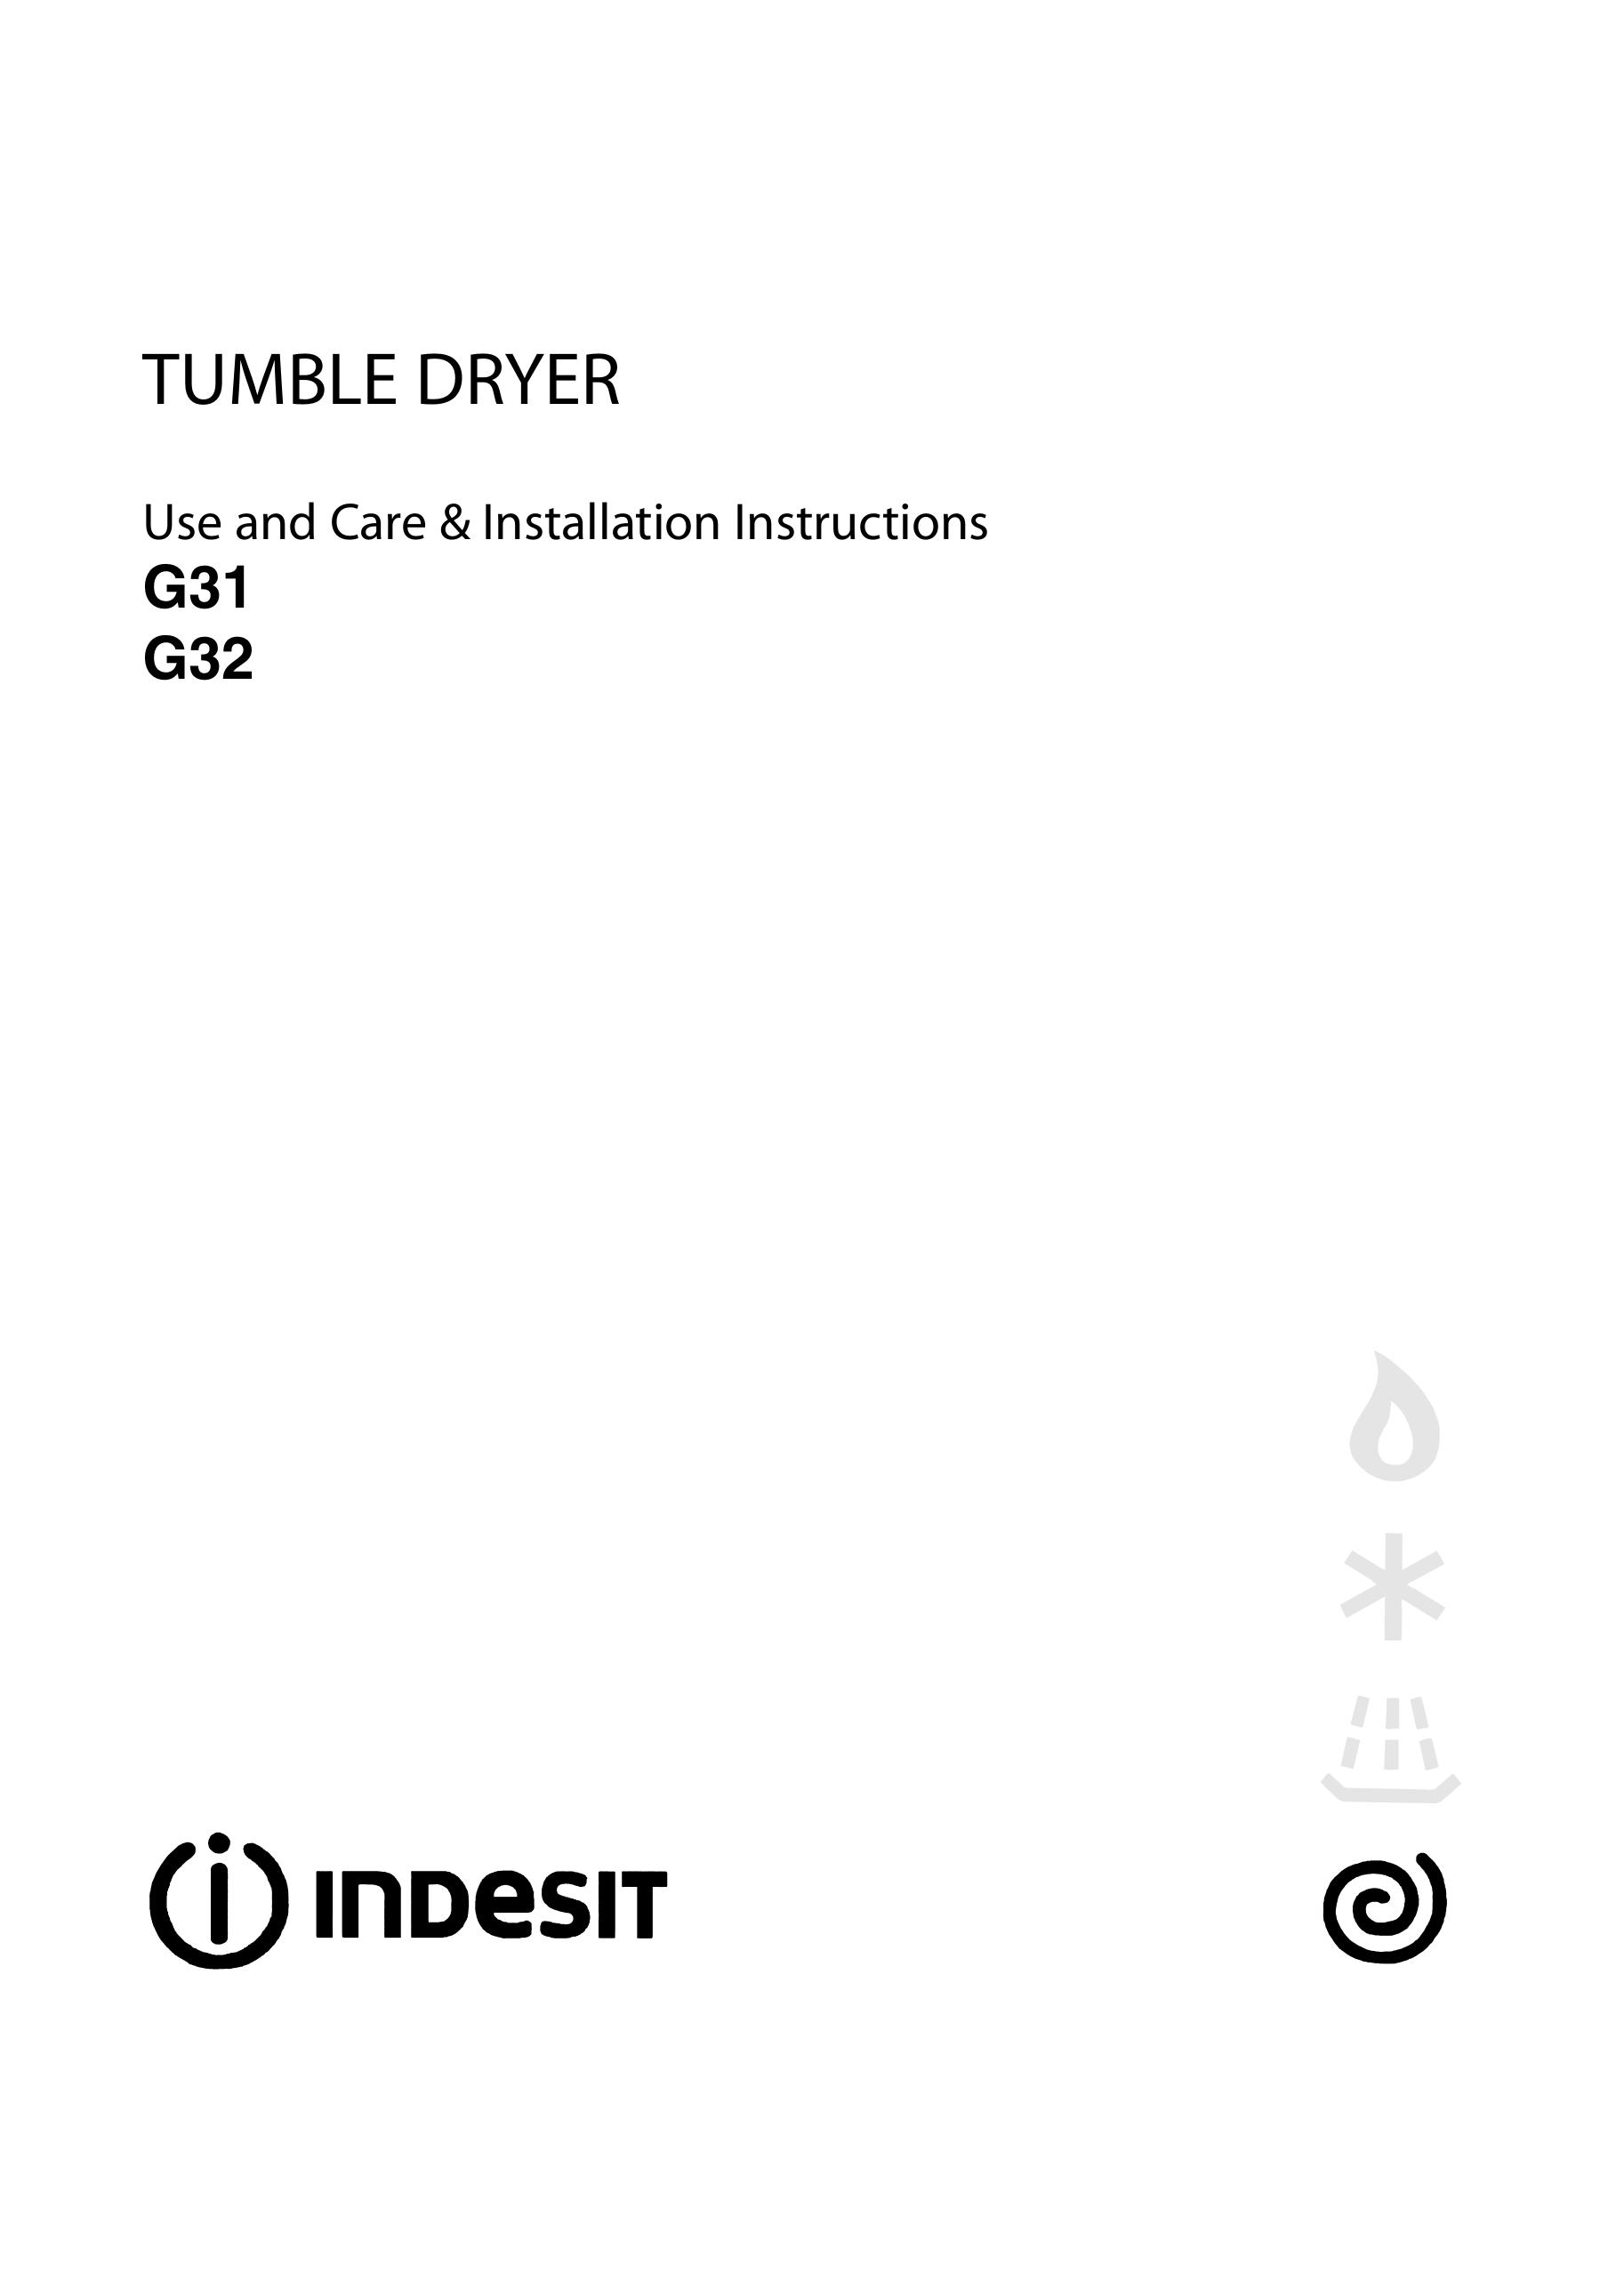 Indesit G31 Clothes Dryer User Manual